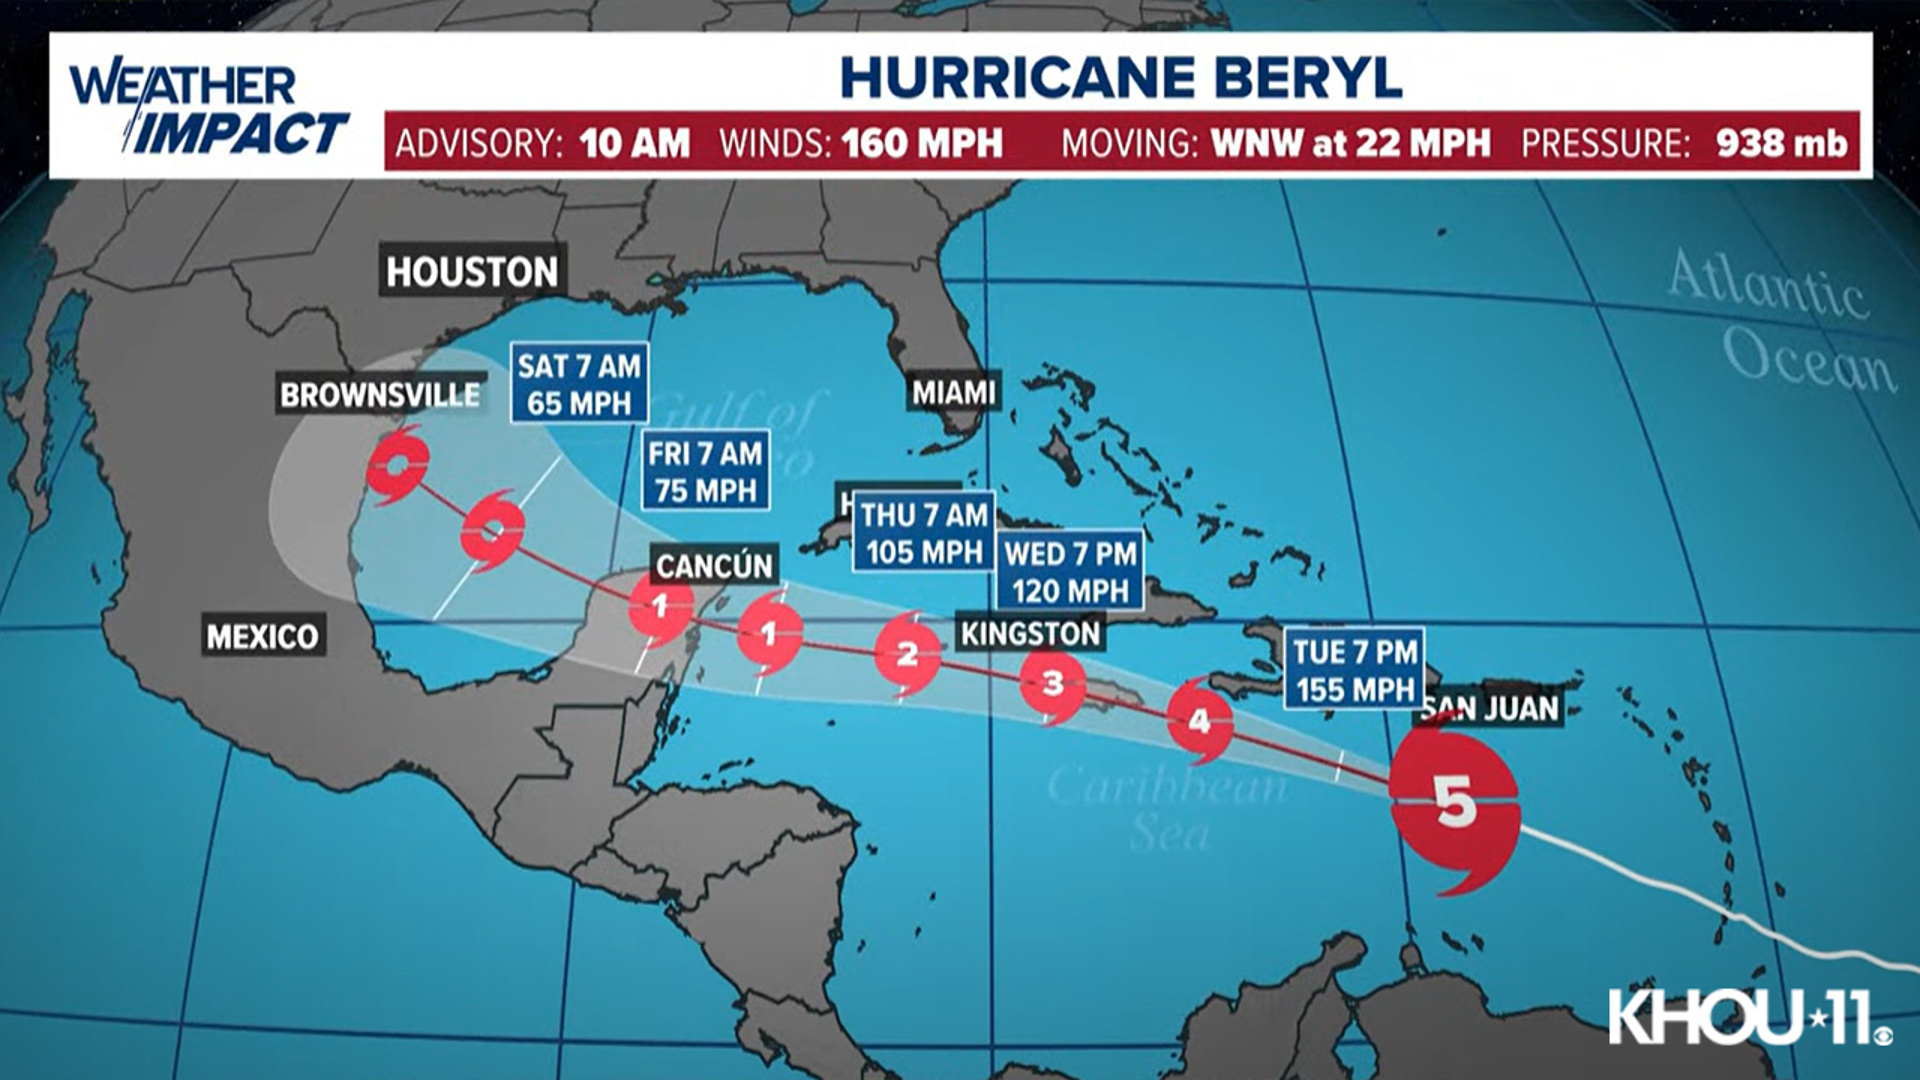 With the 10 a.m. Tuesday update, Beryl was a Category 5 storm with maximum sustained winds of 165 mph, moving west-northwest at 22 mph.